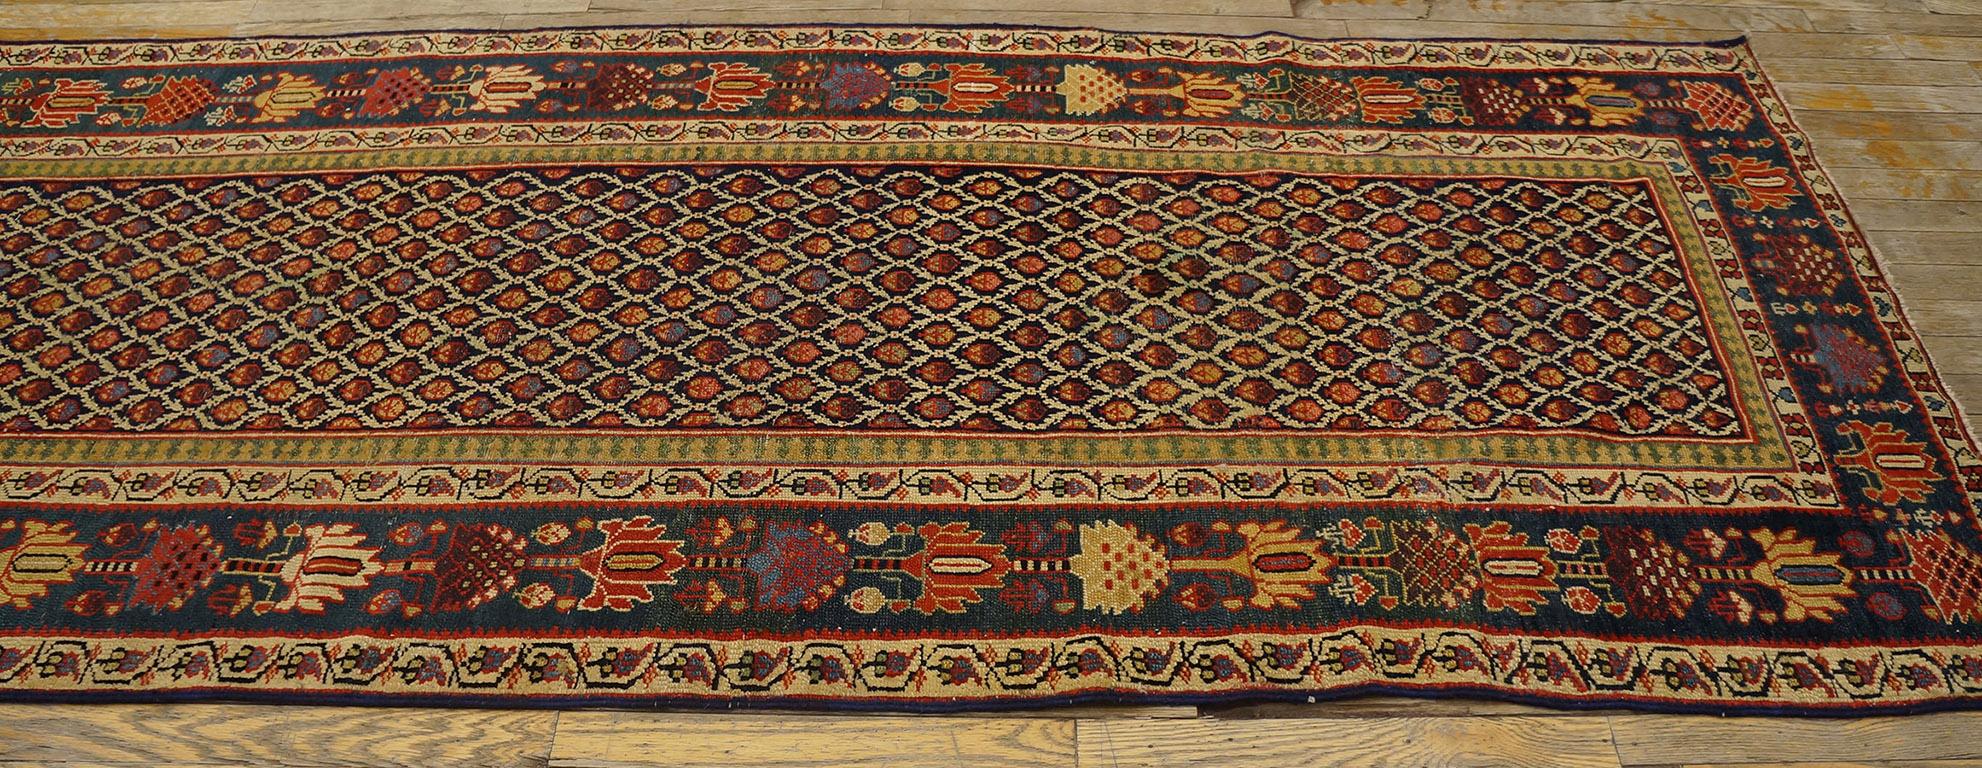 Hand-Knotted Early 19th Century N.W. Persian Carpet  ( 3'3